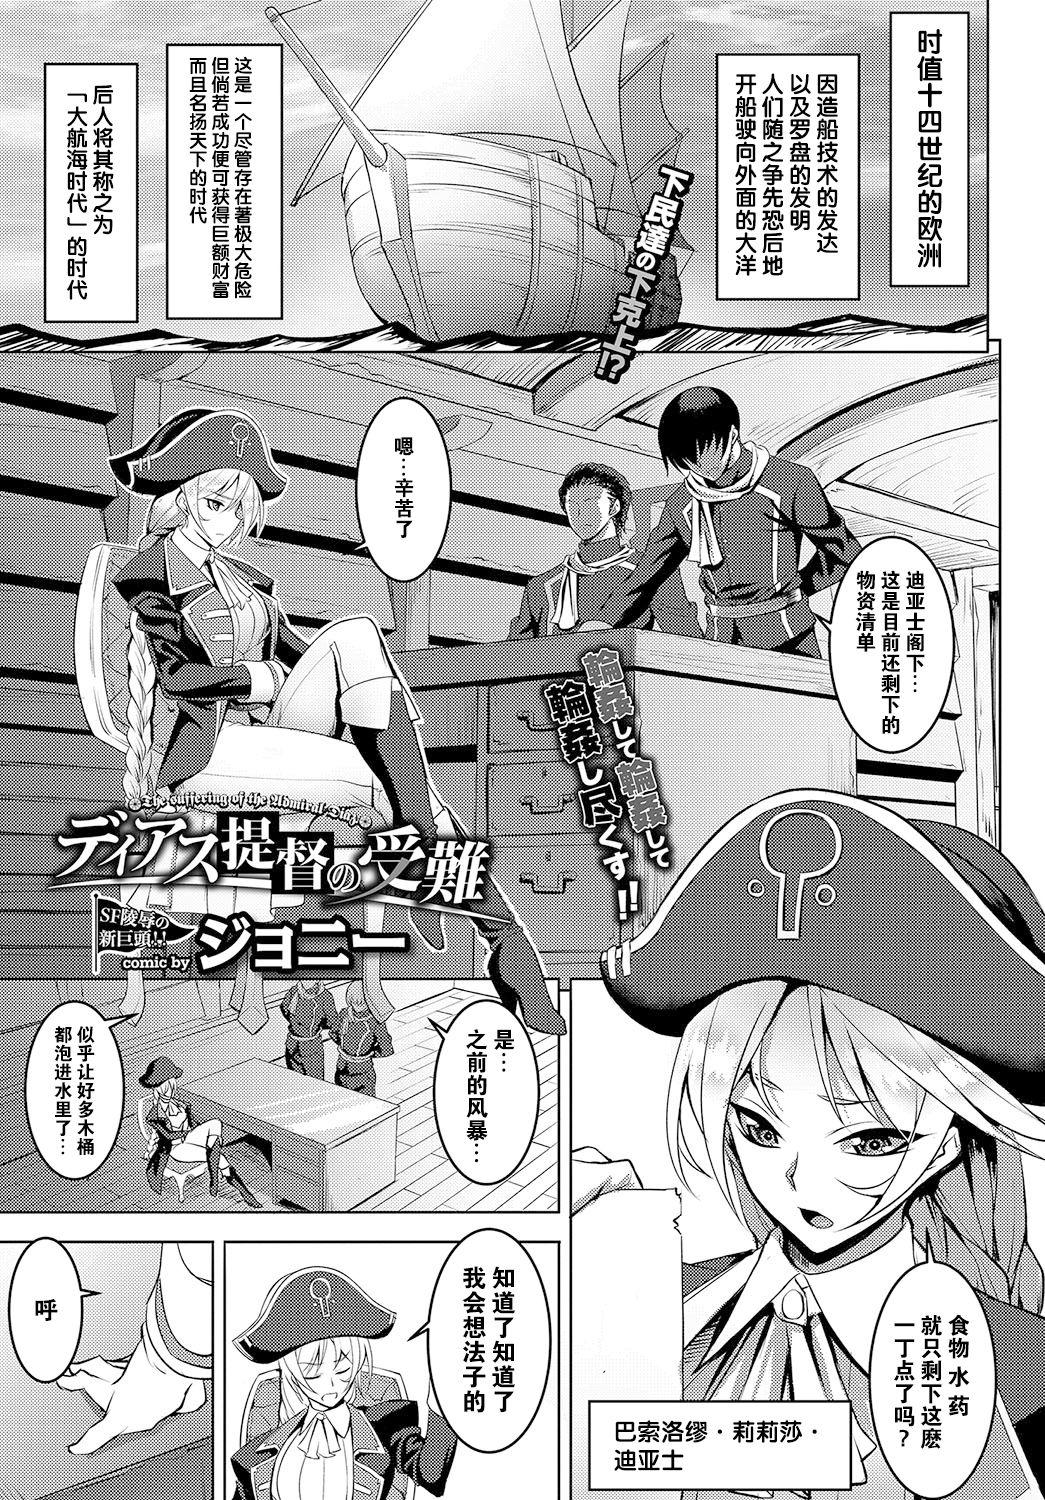 Exotic Diaz Teitoku no Junan - The suffering of the Admiral Diaz Licking - Page 2